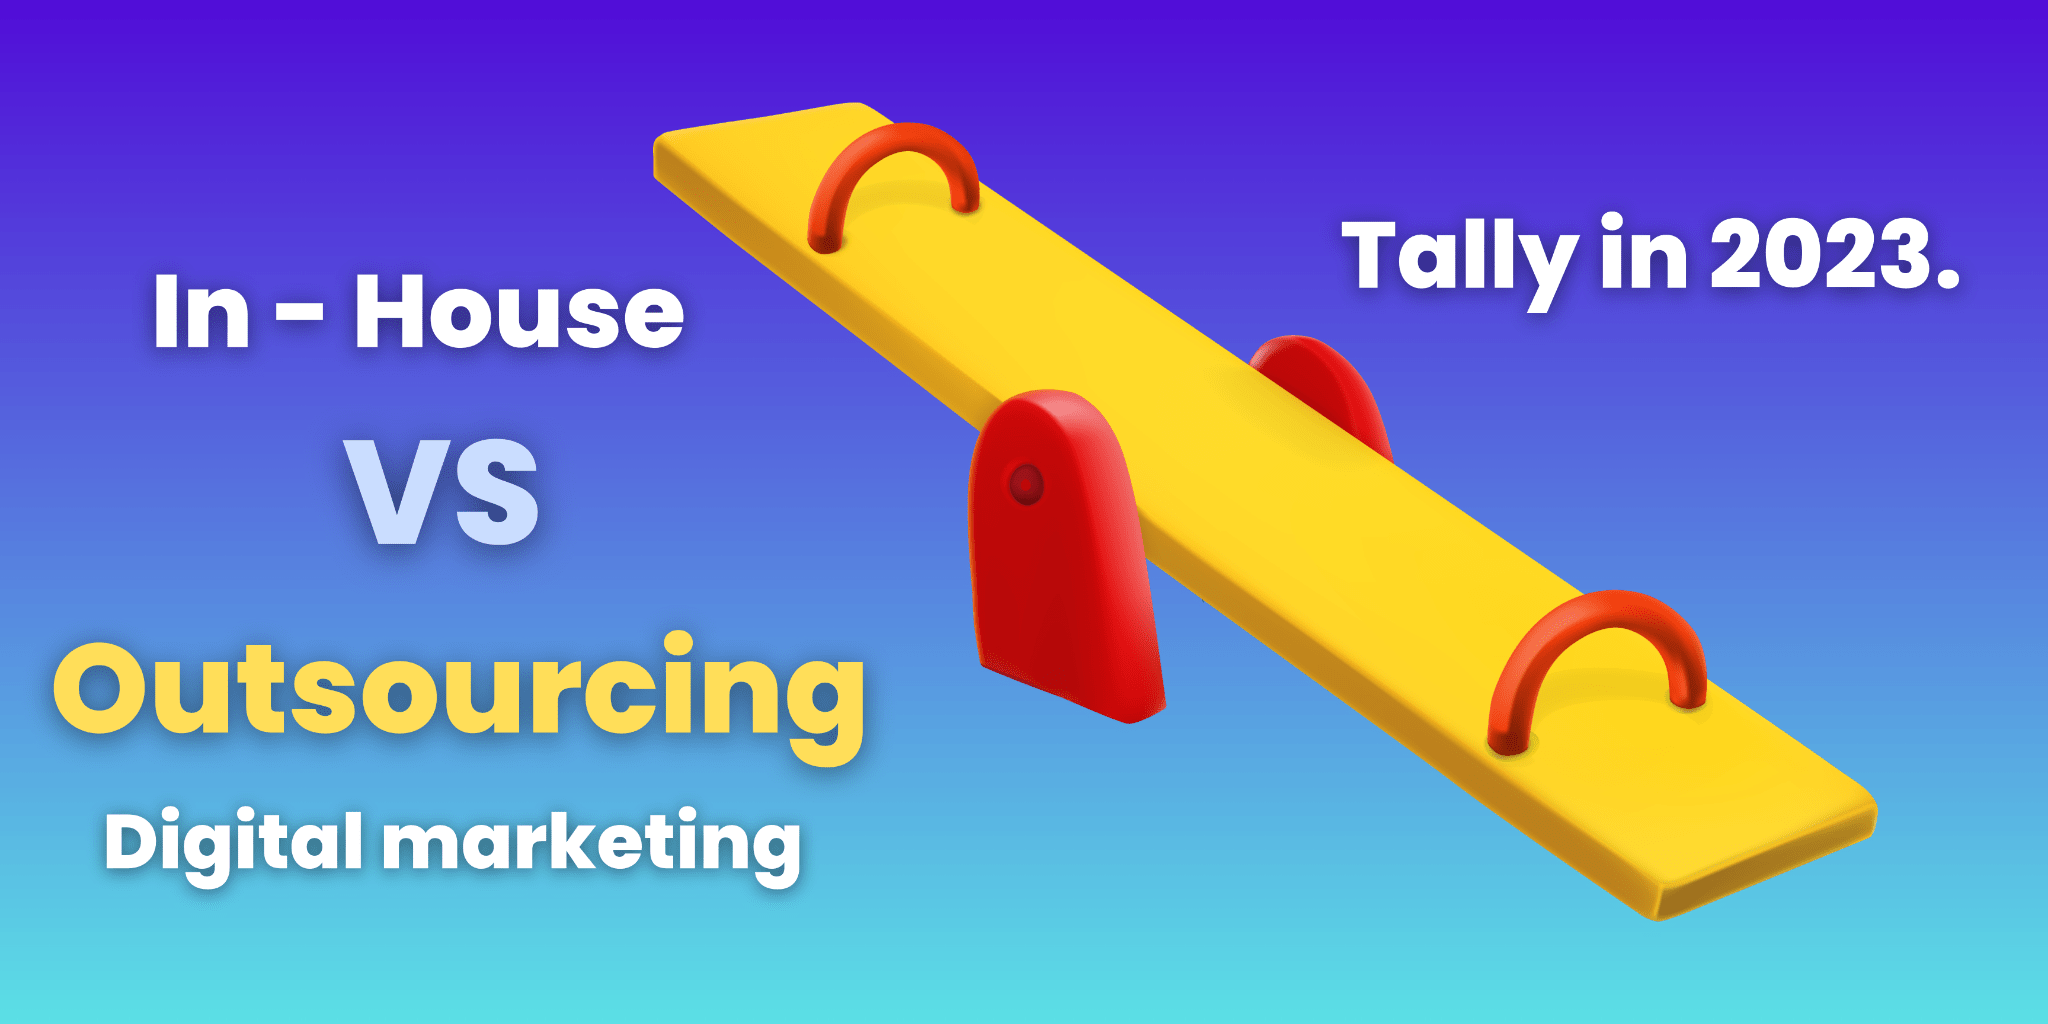 In House VS Outsourcing Digital Marketing - Tally in 2023.